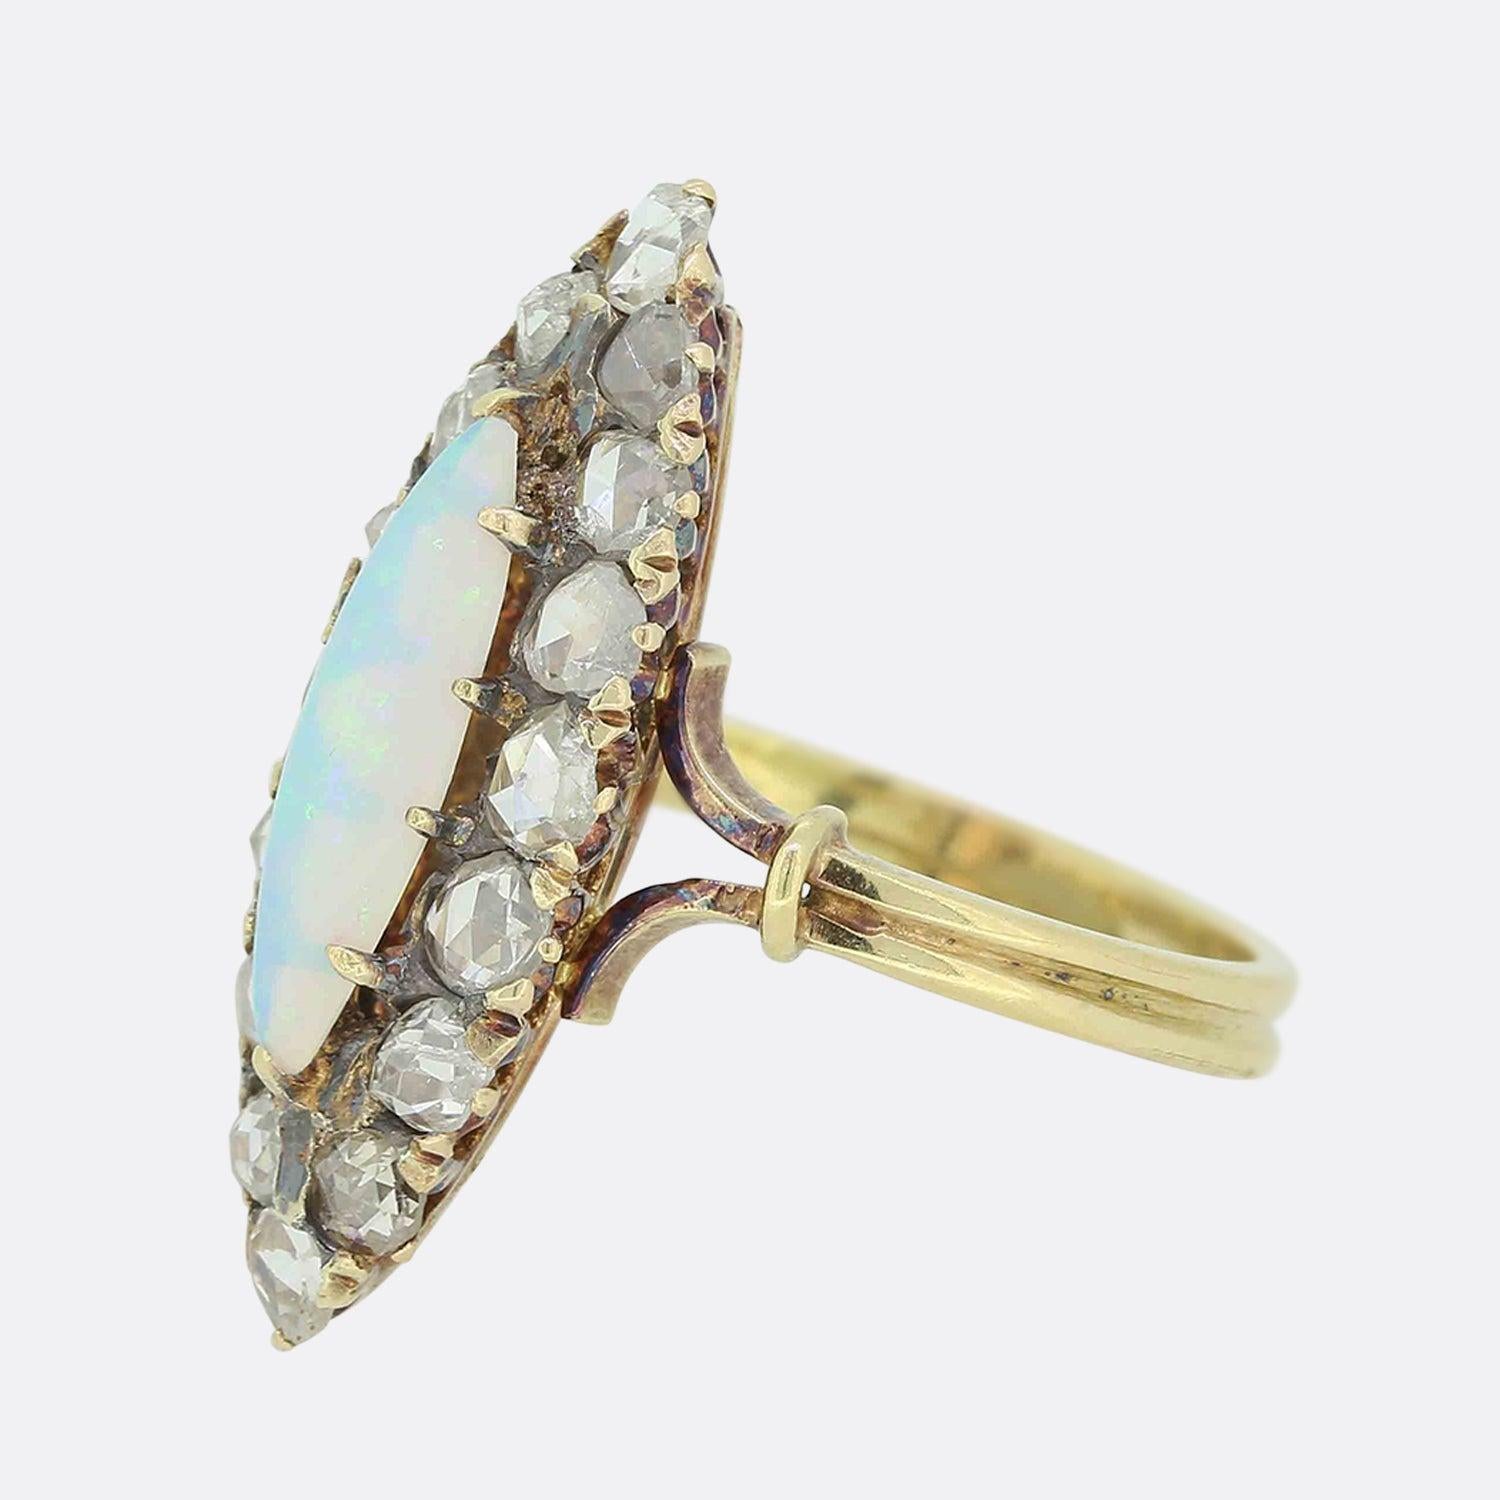 Here we have an opal and diamond navette ring from the Victorian era. This antique piece showcases an endearing oval shaped opal with a deep play of colour which sits well proportioned at the centre of the face. This focal gemstone is accentuated by